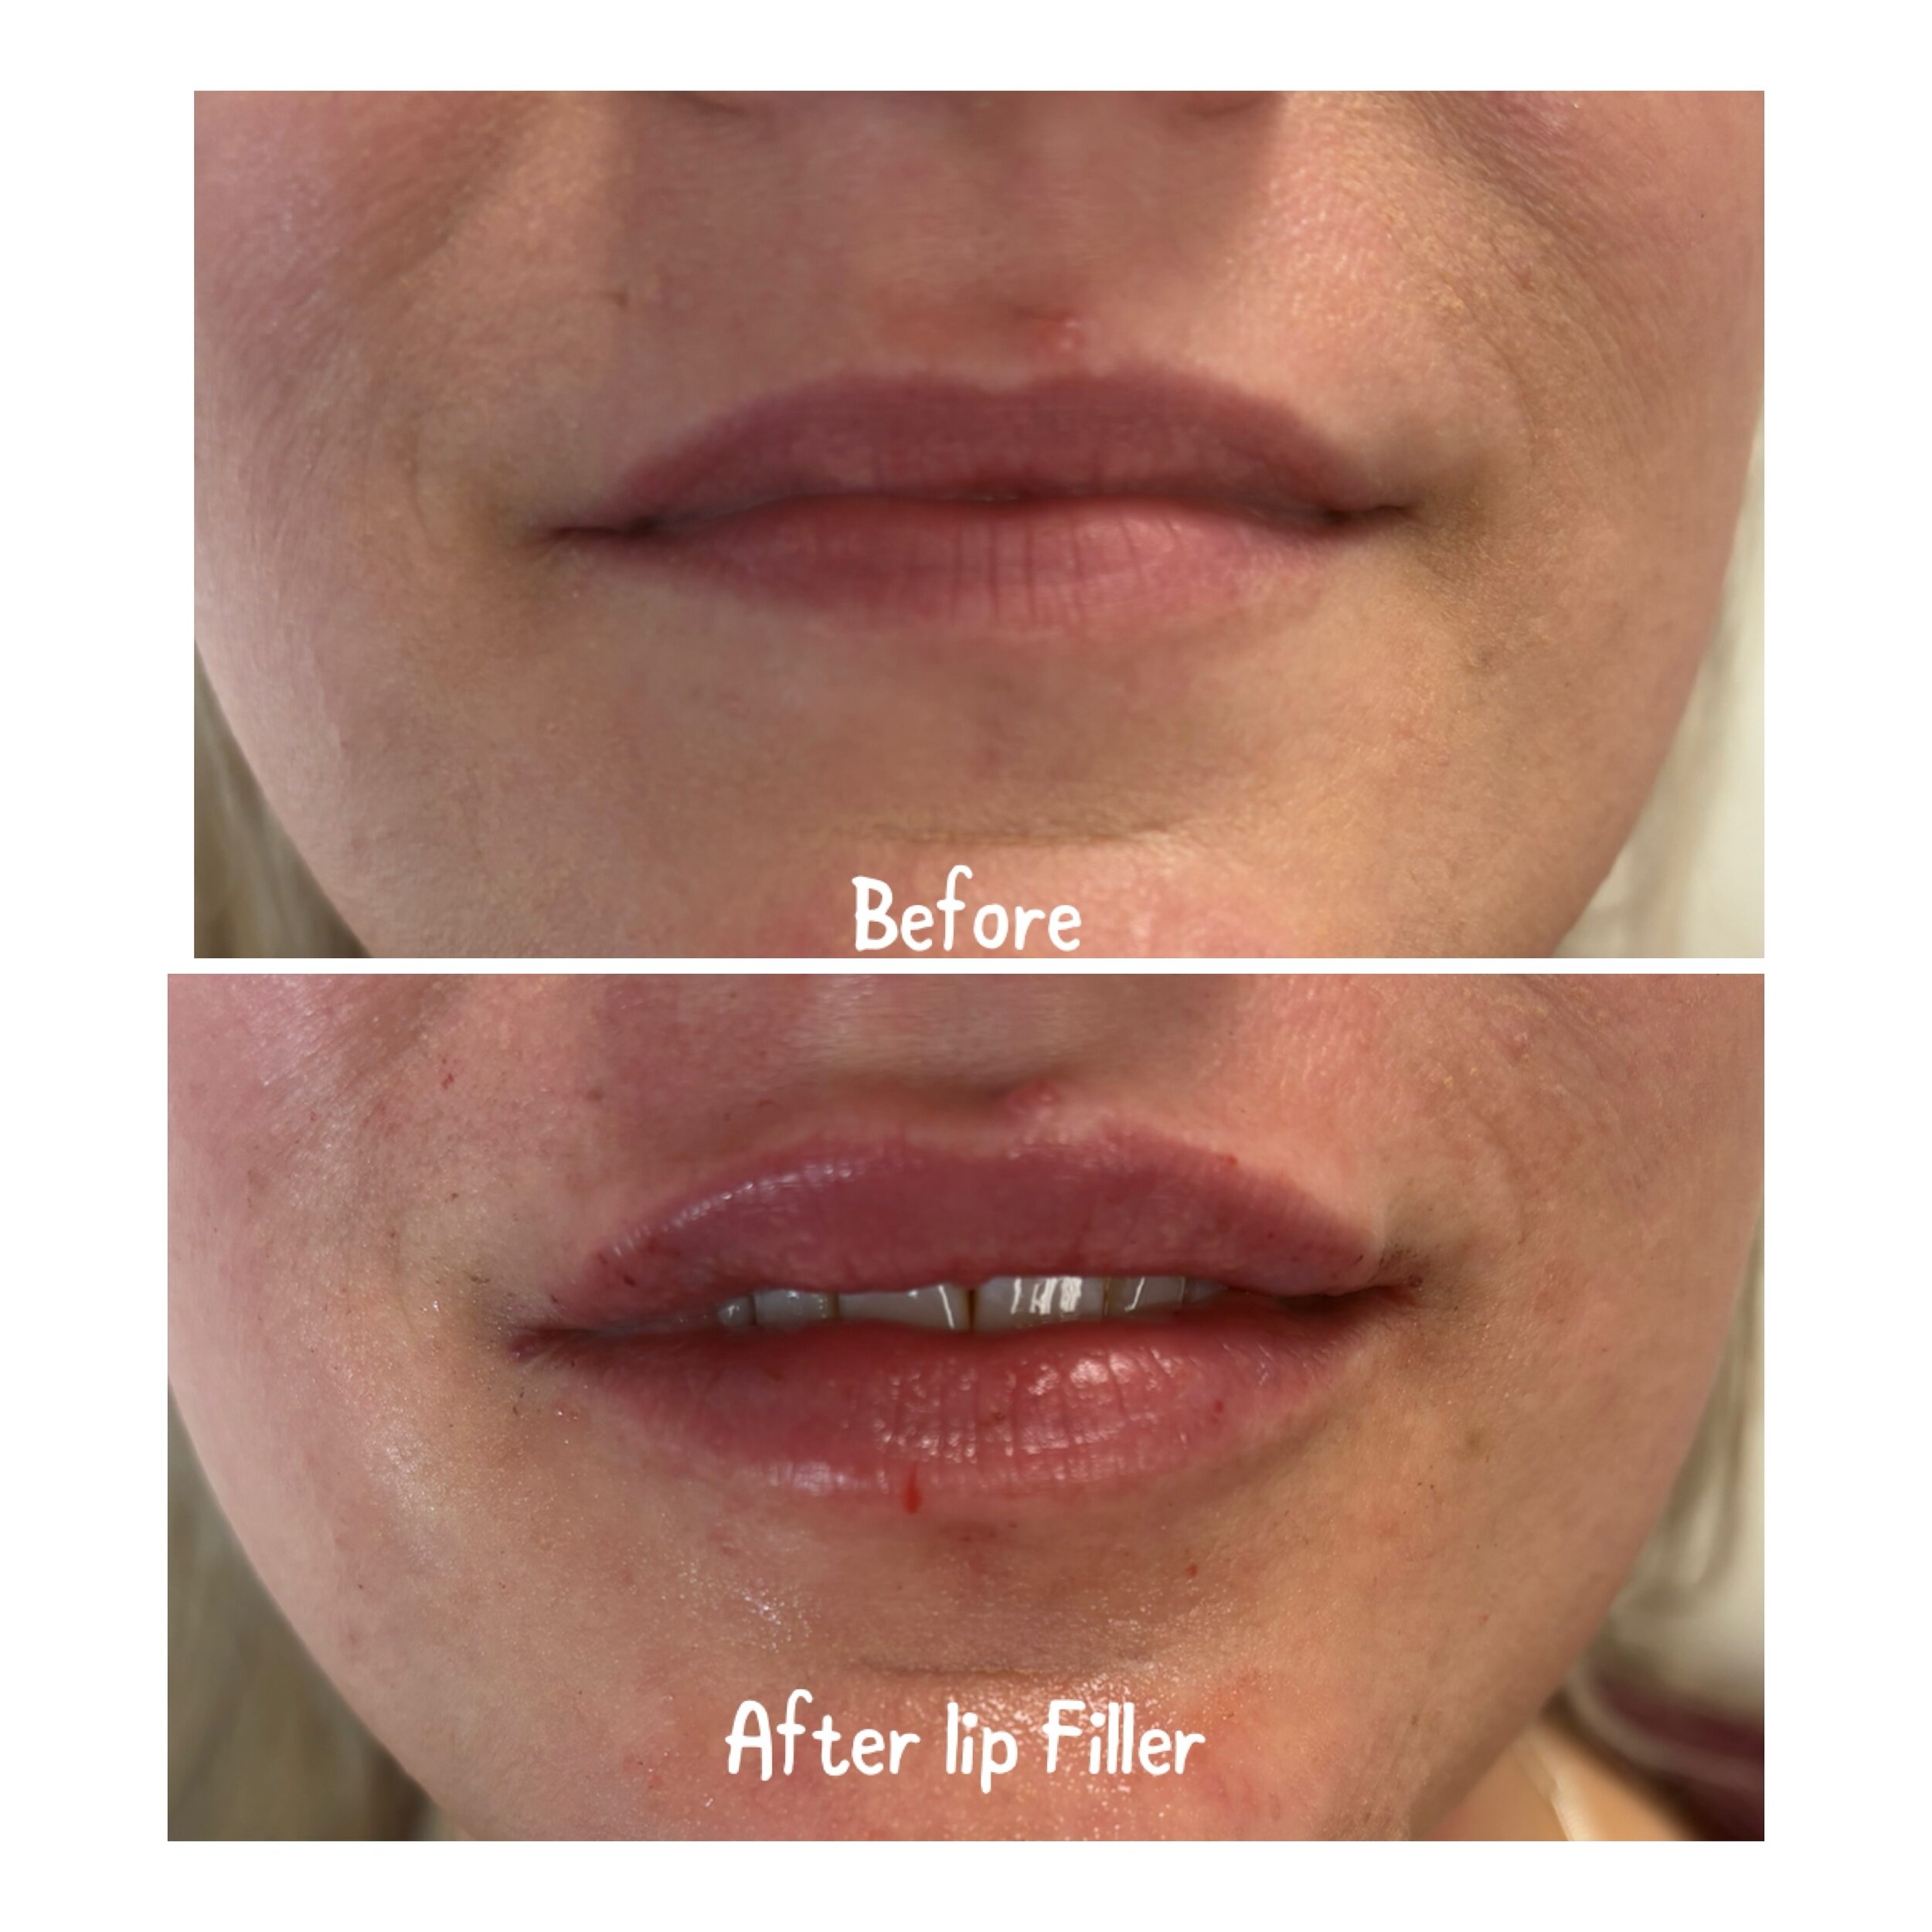 Pucker up and book your appointment for Filler Friday on April 19th to save $75 off of filler 💋